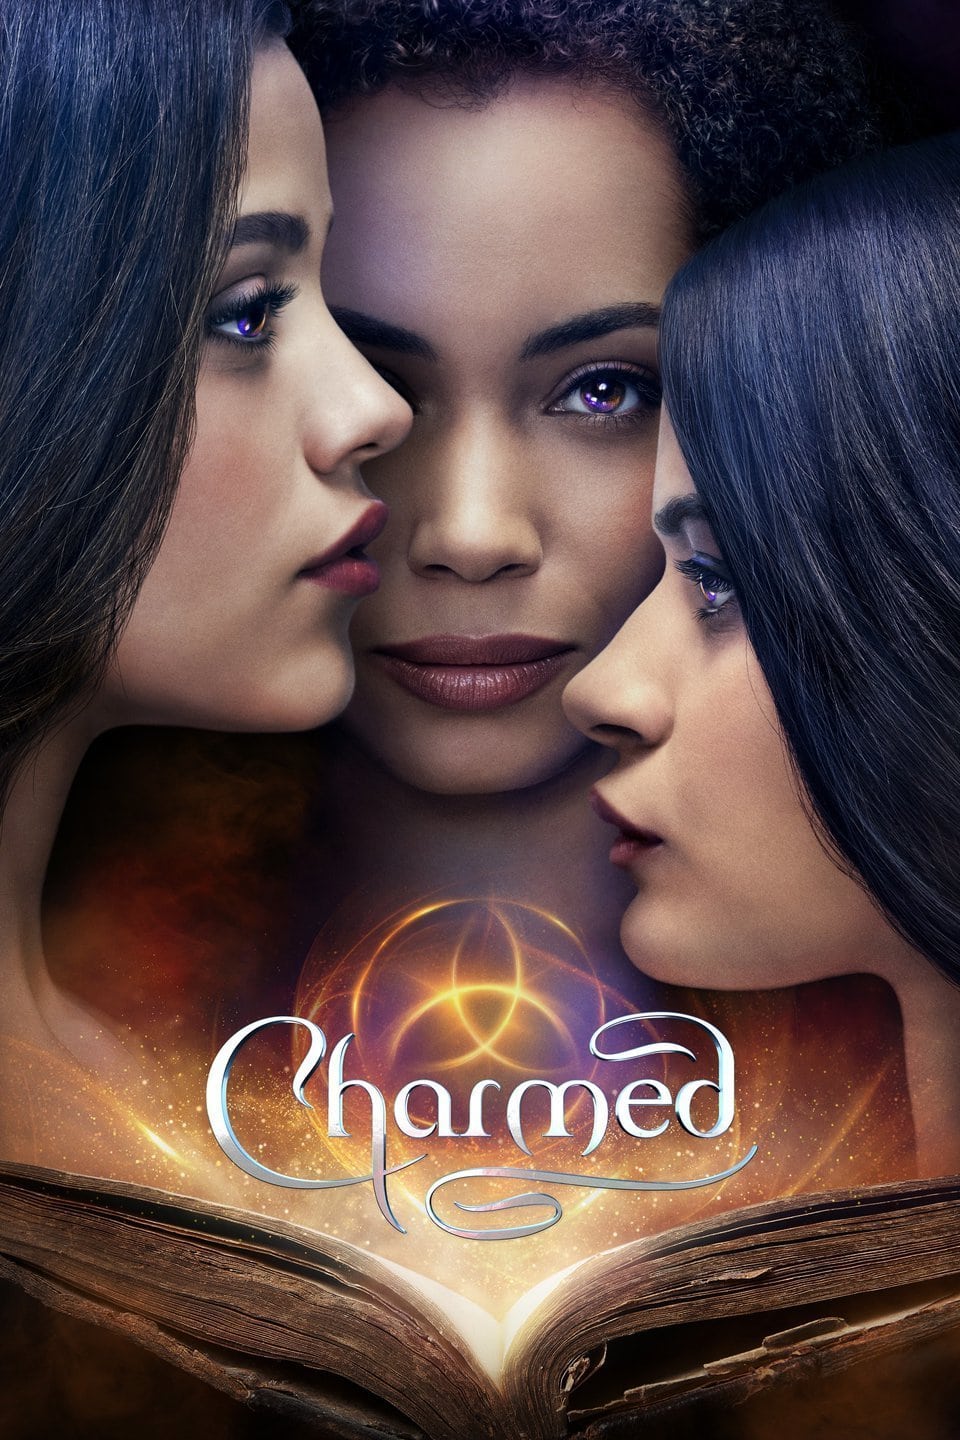 Charmed reboot poster